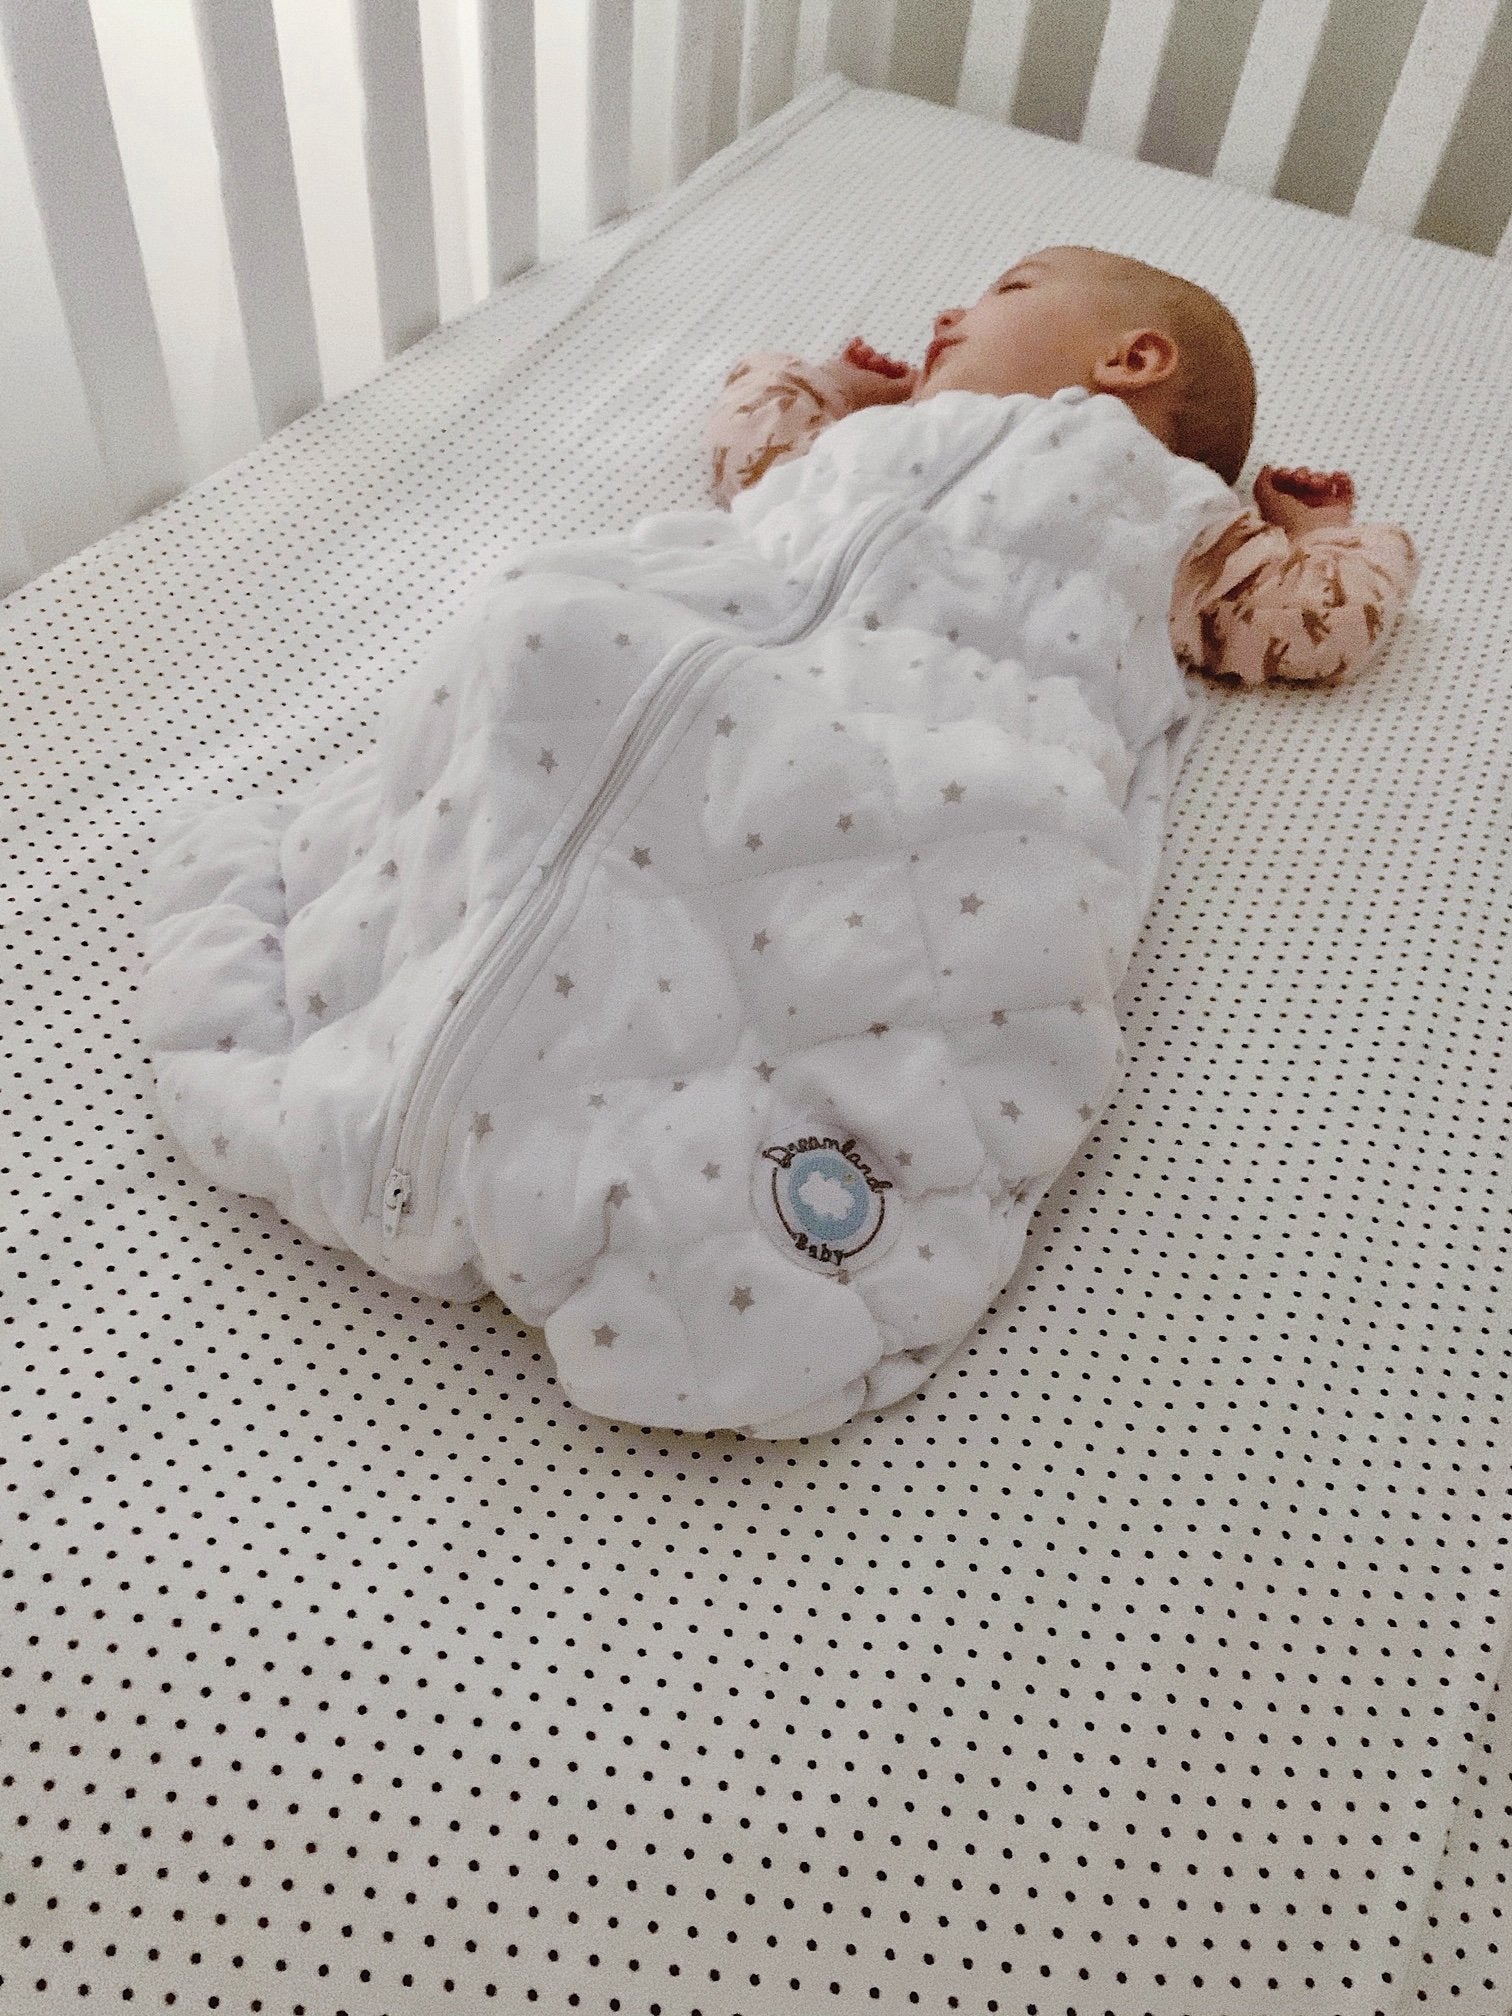 How to use a baby sleeping bag or Grobag - Someone's Mum